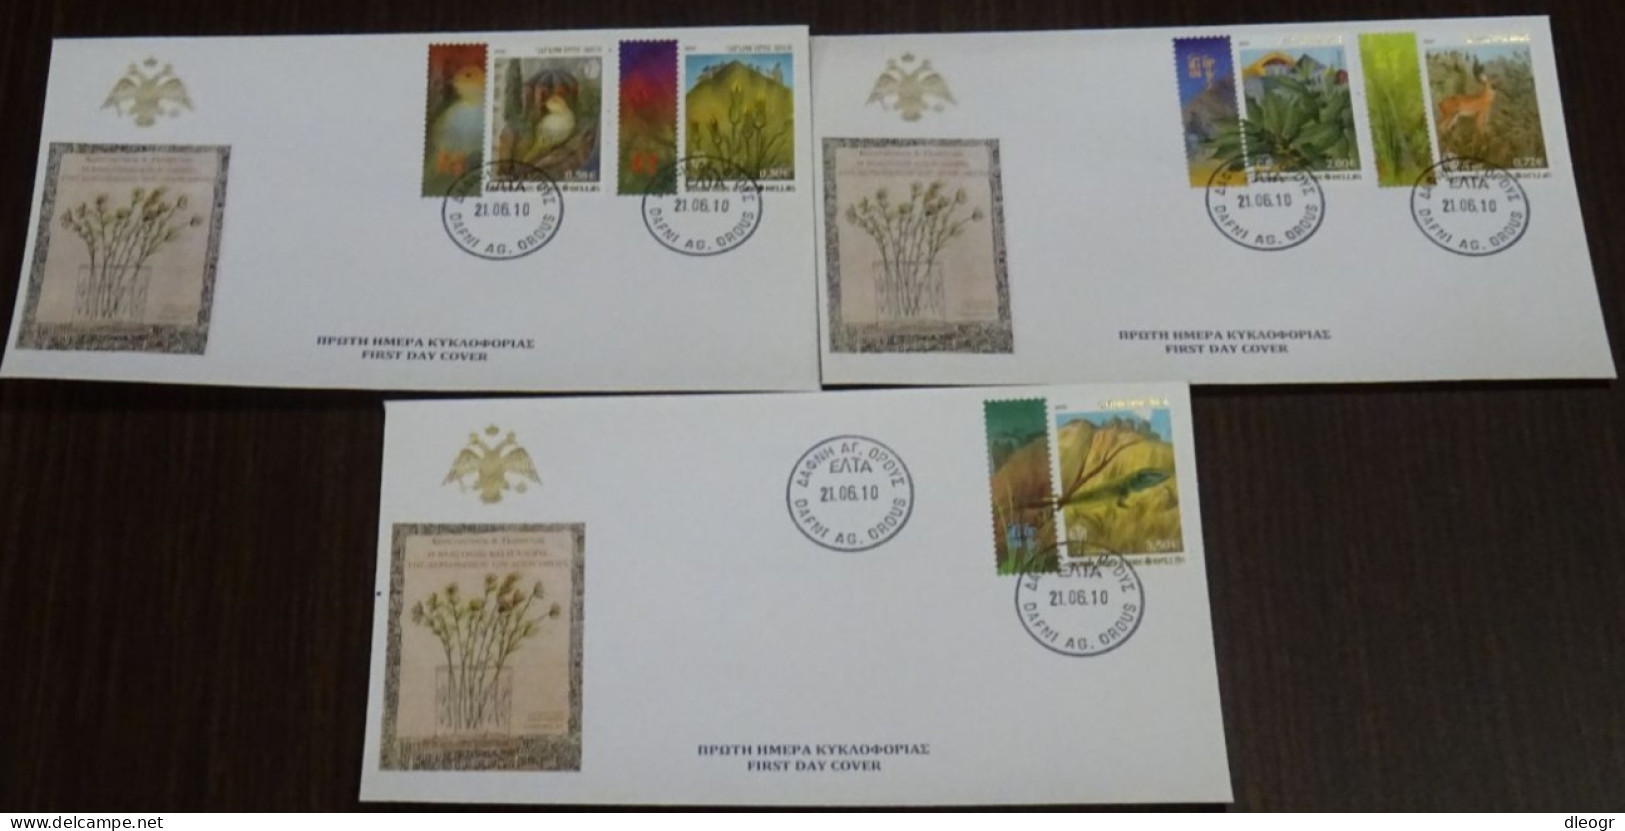 Greece Mount Athos 2010 Flora-Fauna II Unofficial FDC - FDC